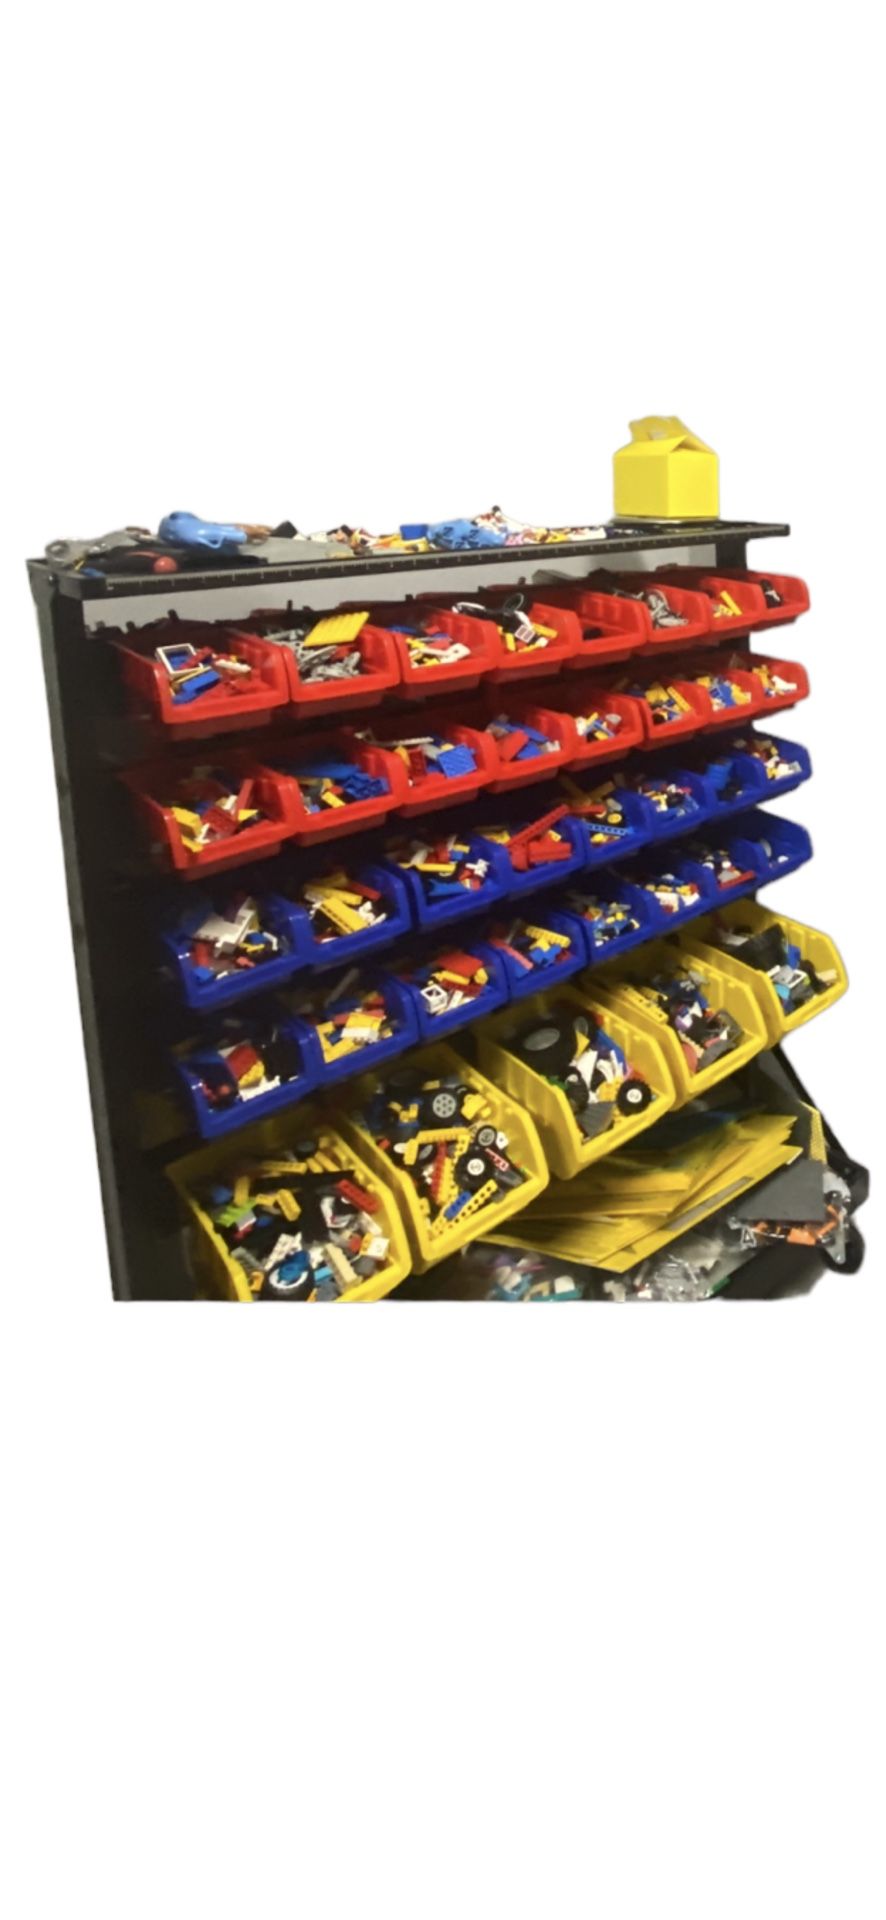 $8/pound-hundreds Of Pounds Of Vintage Legos-excludes People And Large Base Plates 